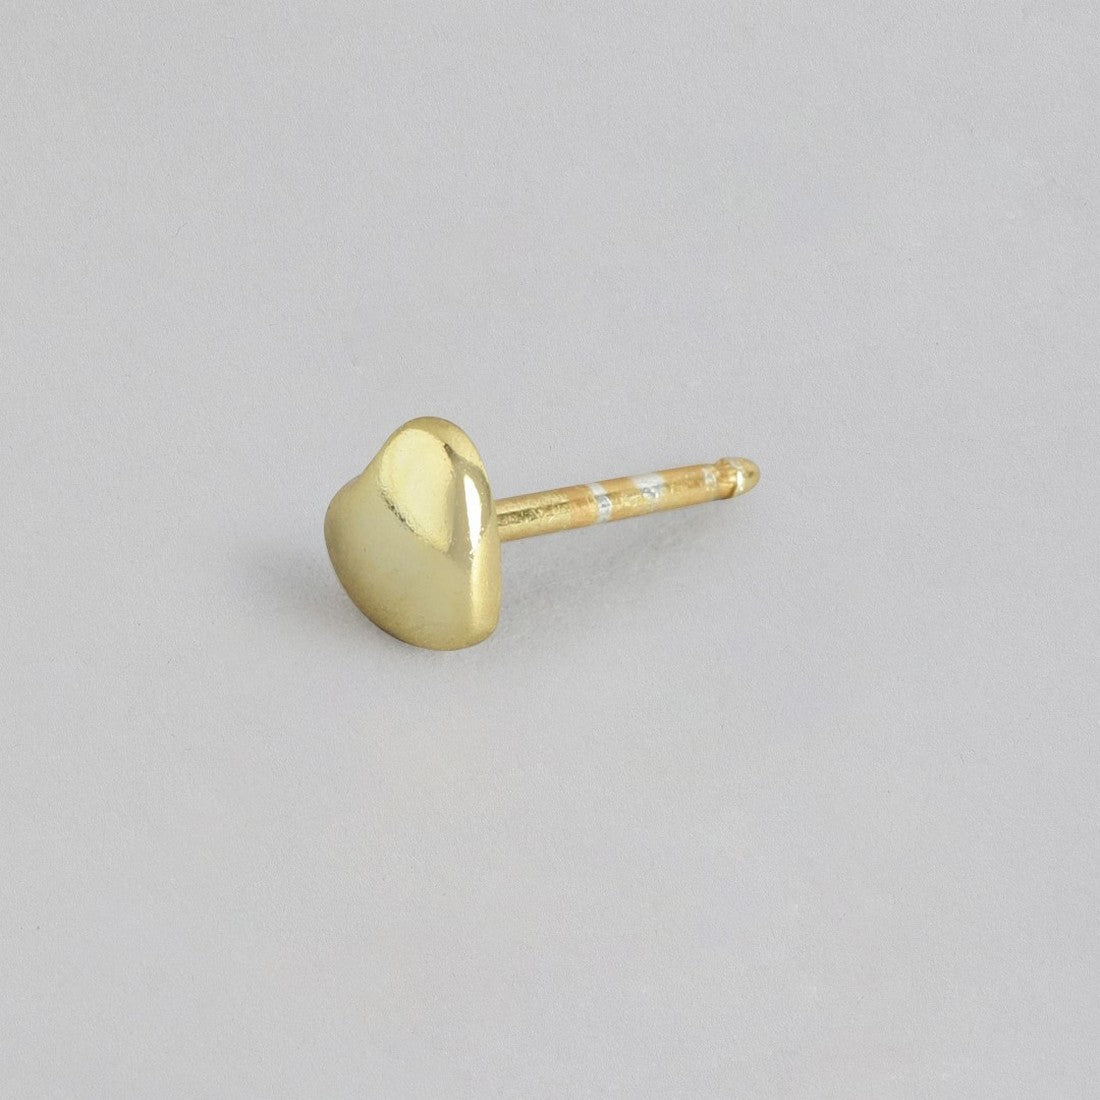 Minimal Heart Gold Plated 925 Sterling Silver Studs Earring